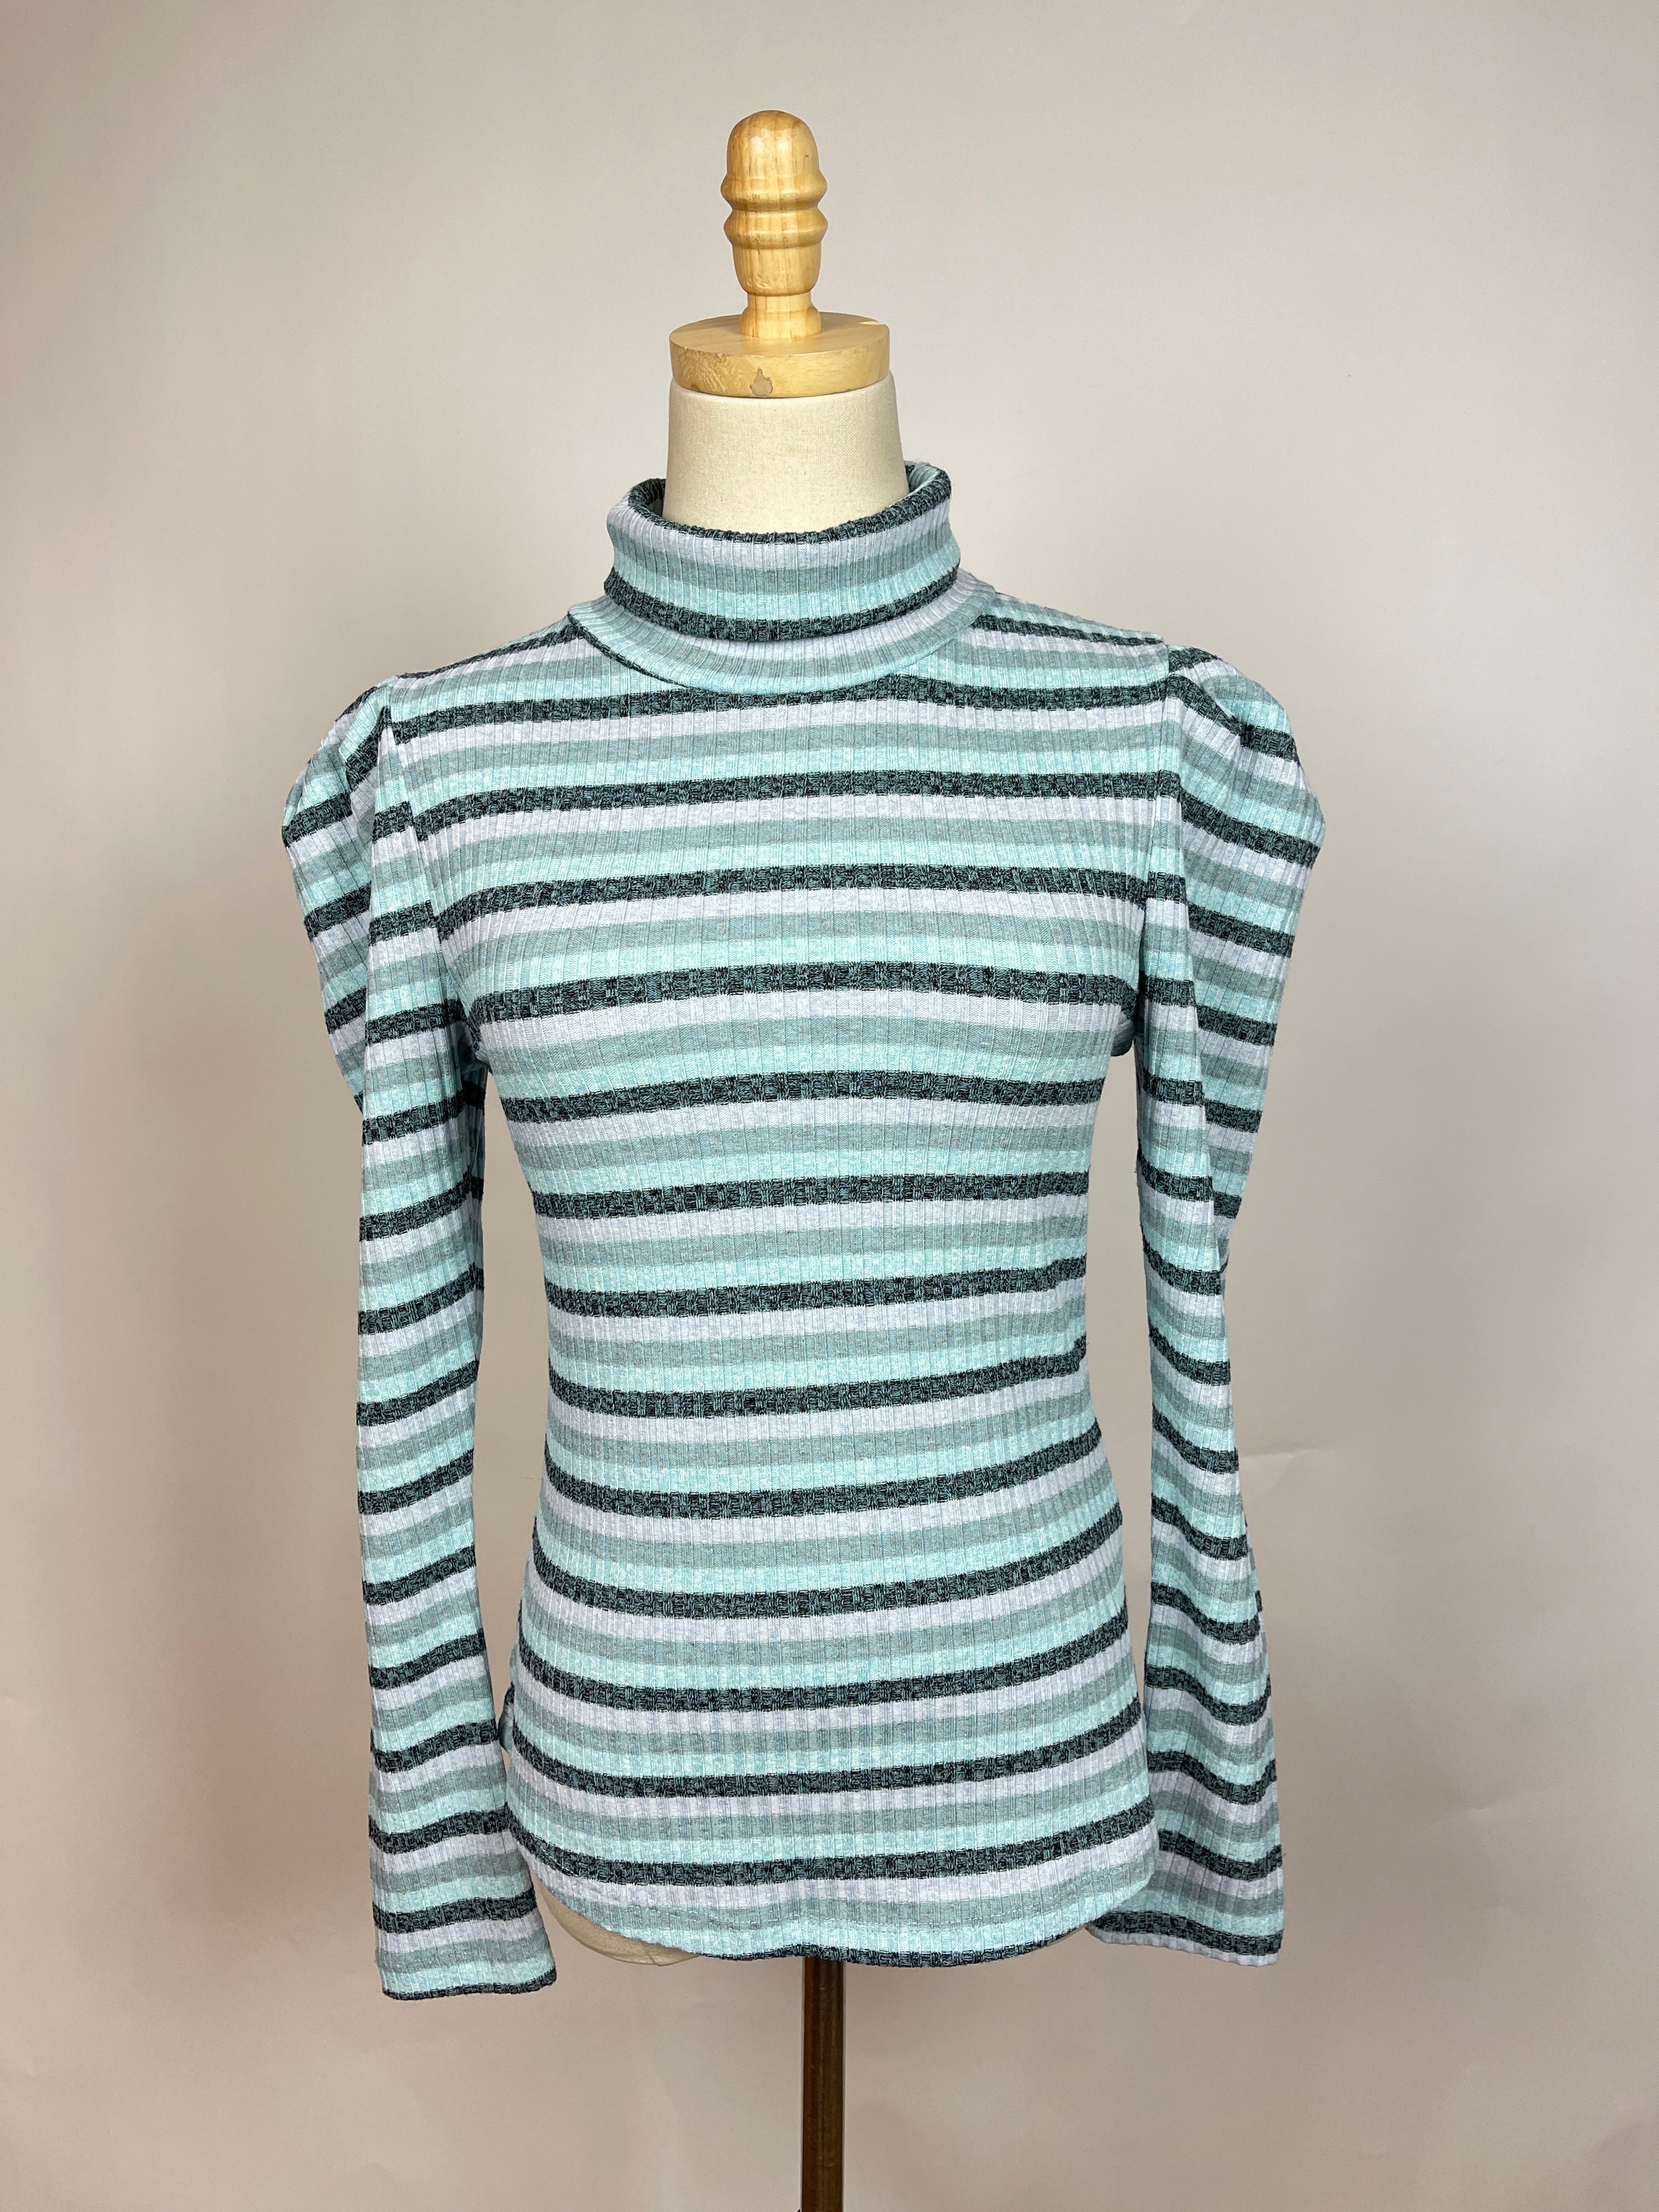 Maeve for Anthropologie Striped Top (M)